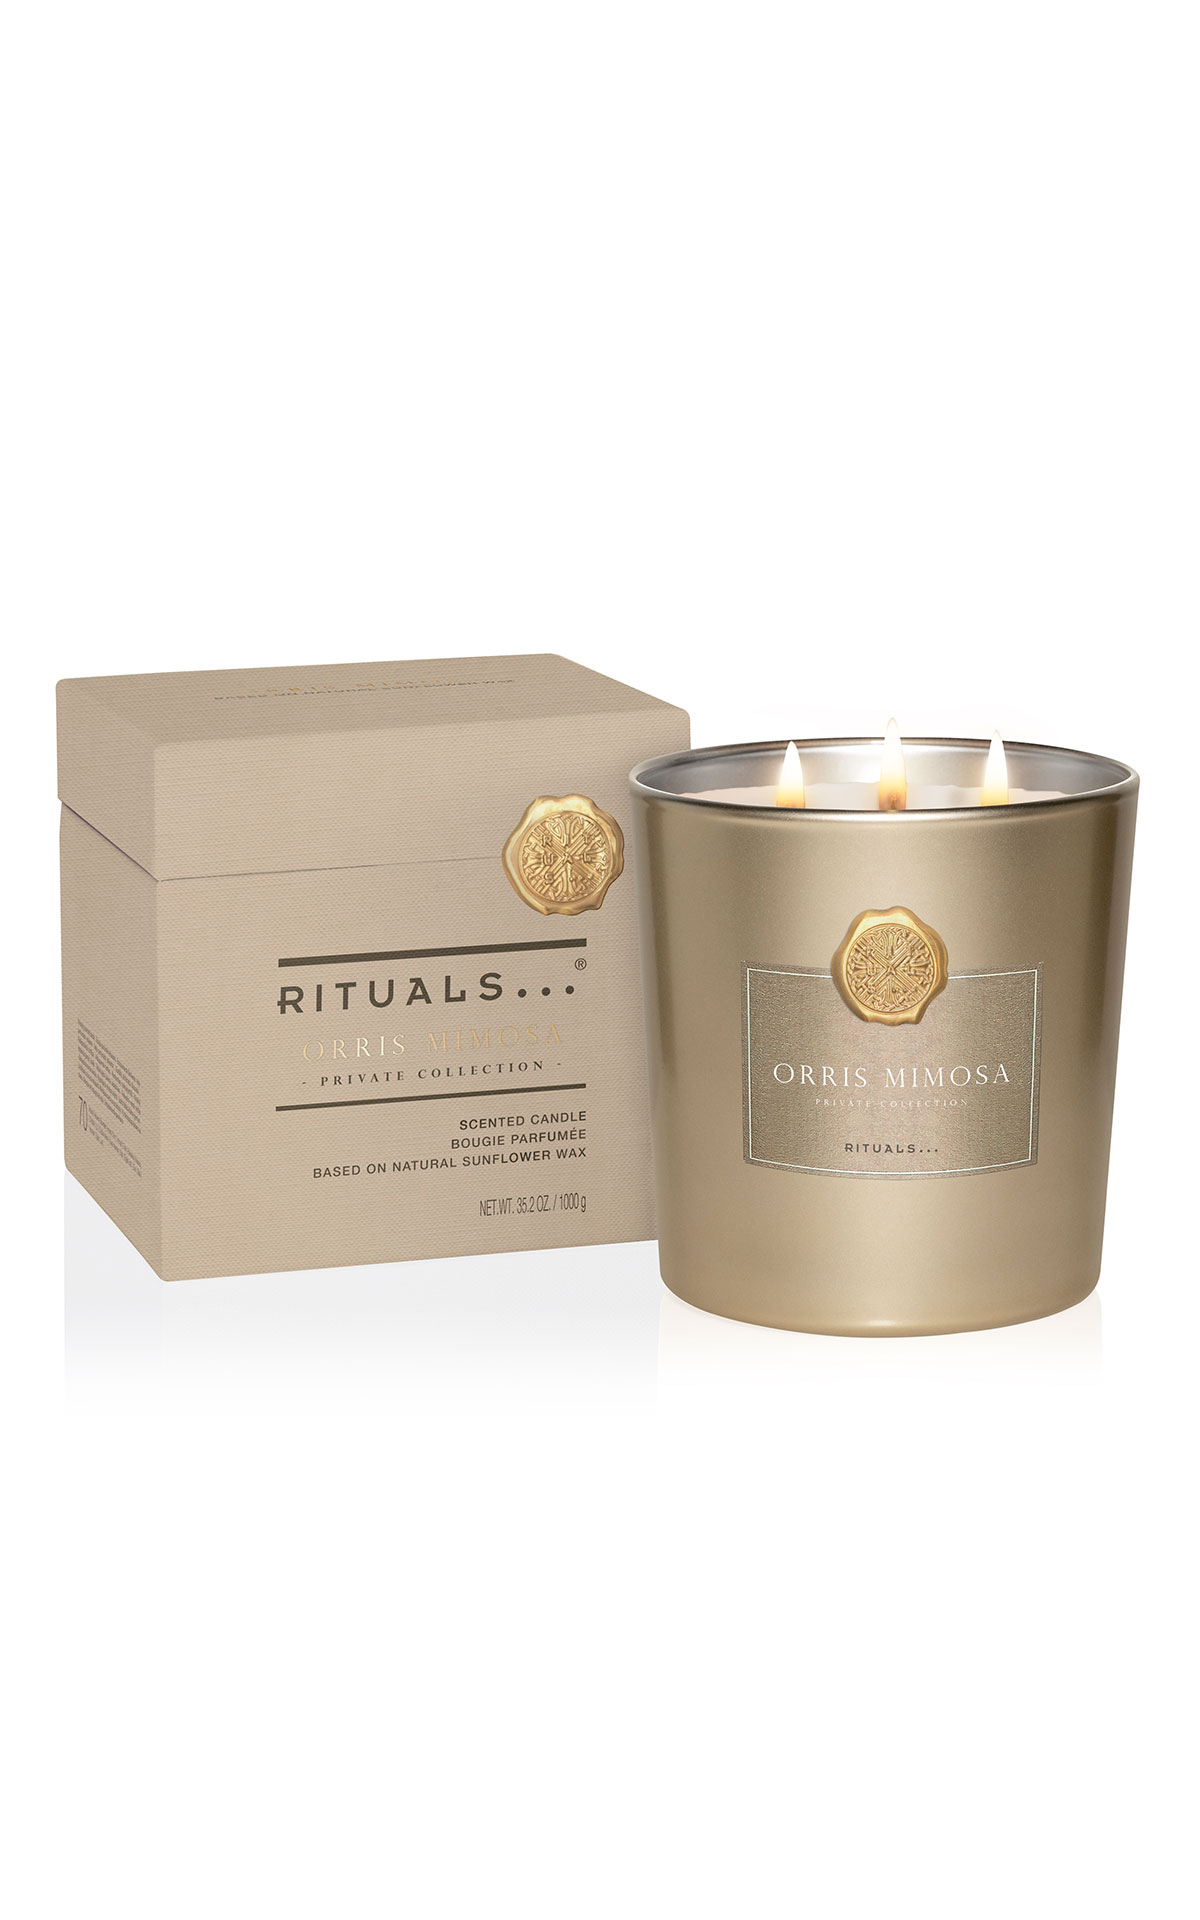 Rituals Private collection - oud mimosa scented candle xl from Bicester Village